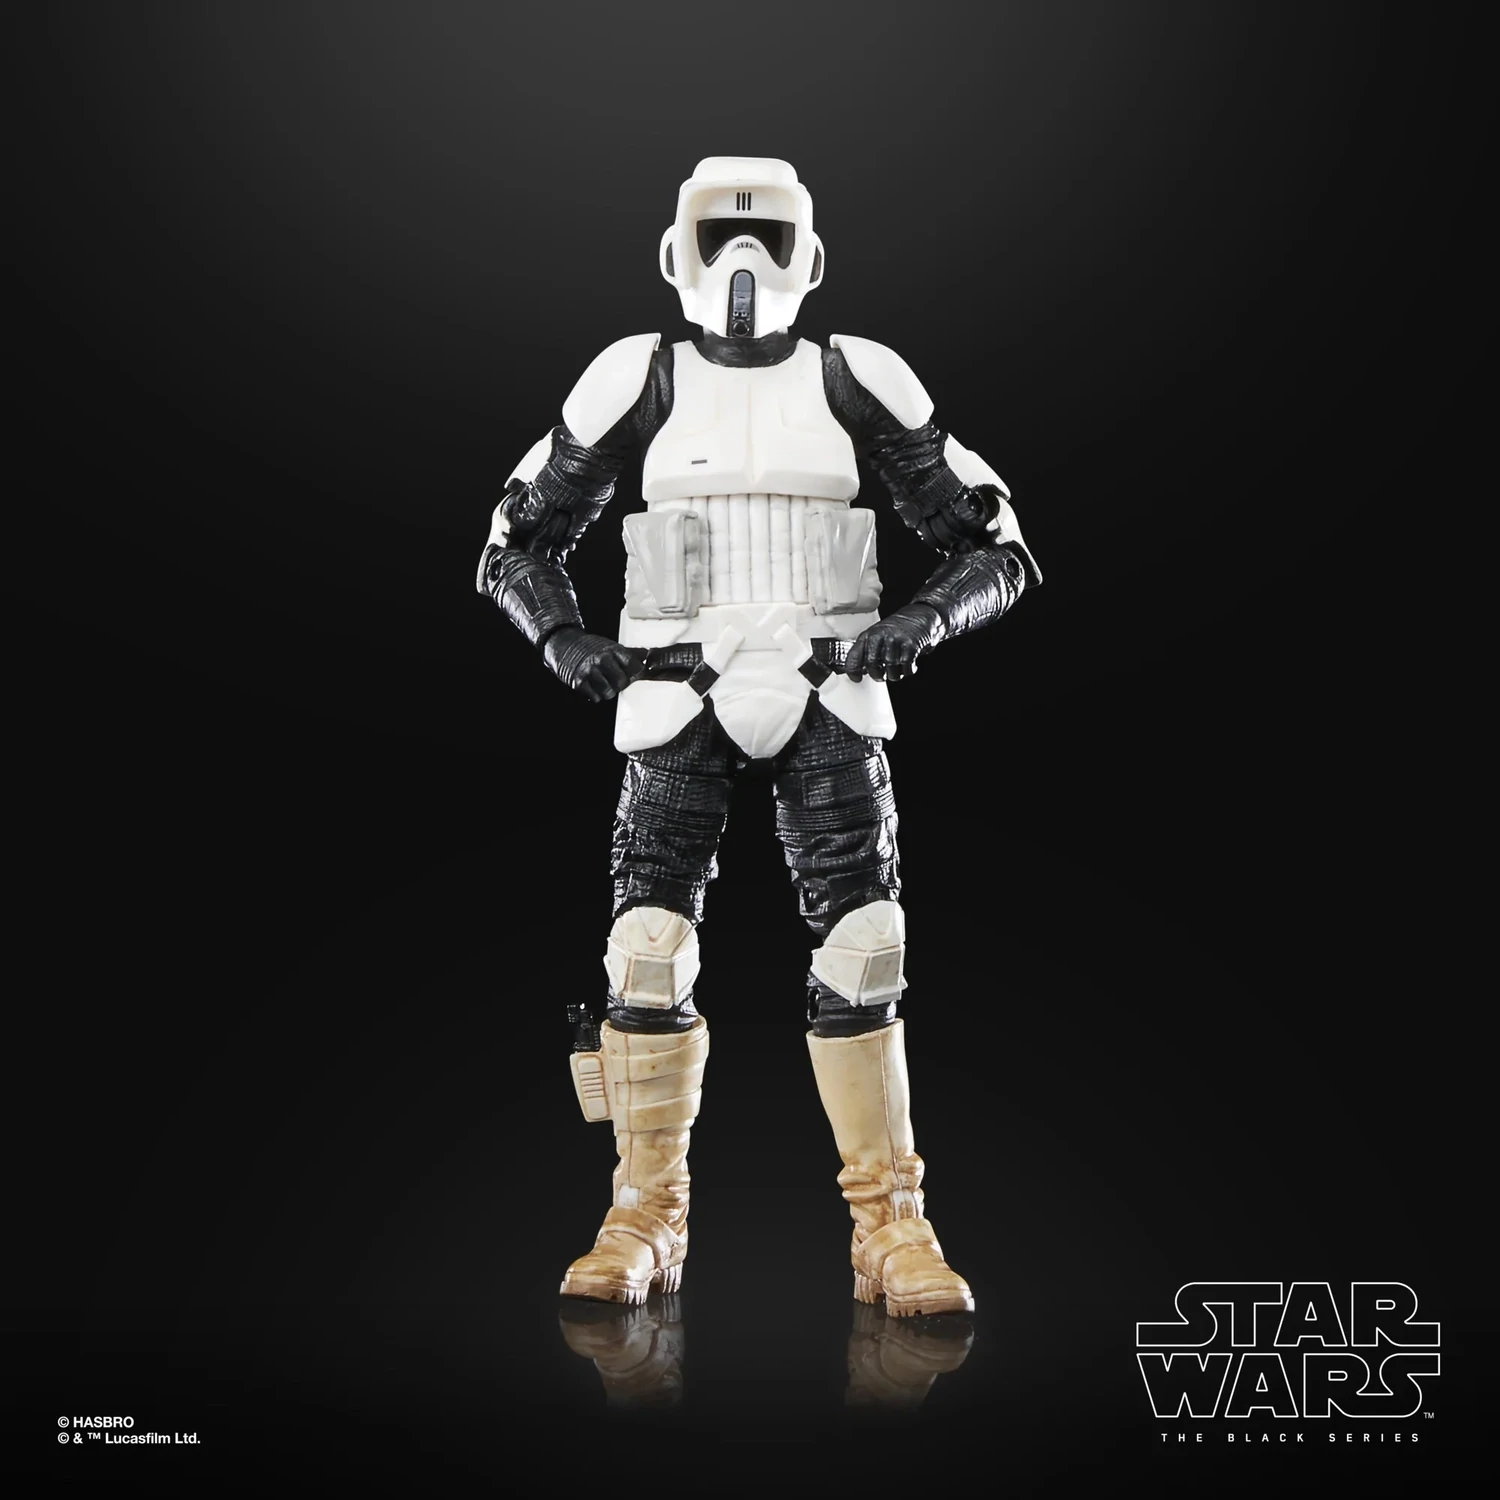 Star Wars The Black Series Return of the Jedi 40th Anniversary 6 Inch Biker Scout Action Figure